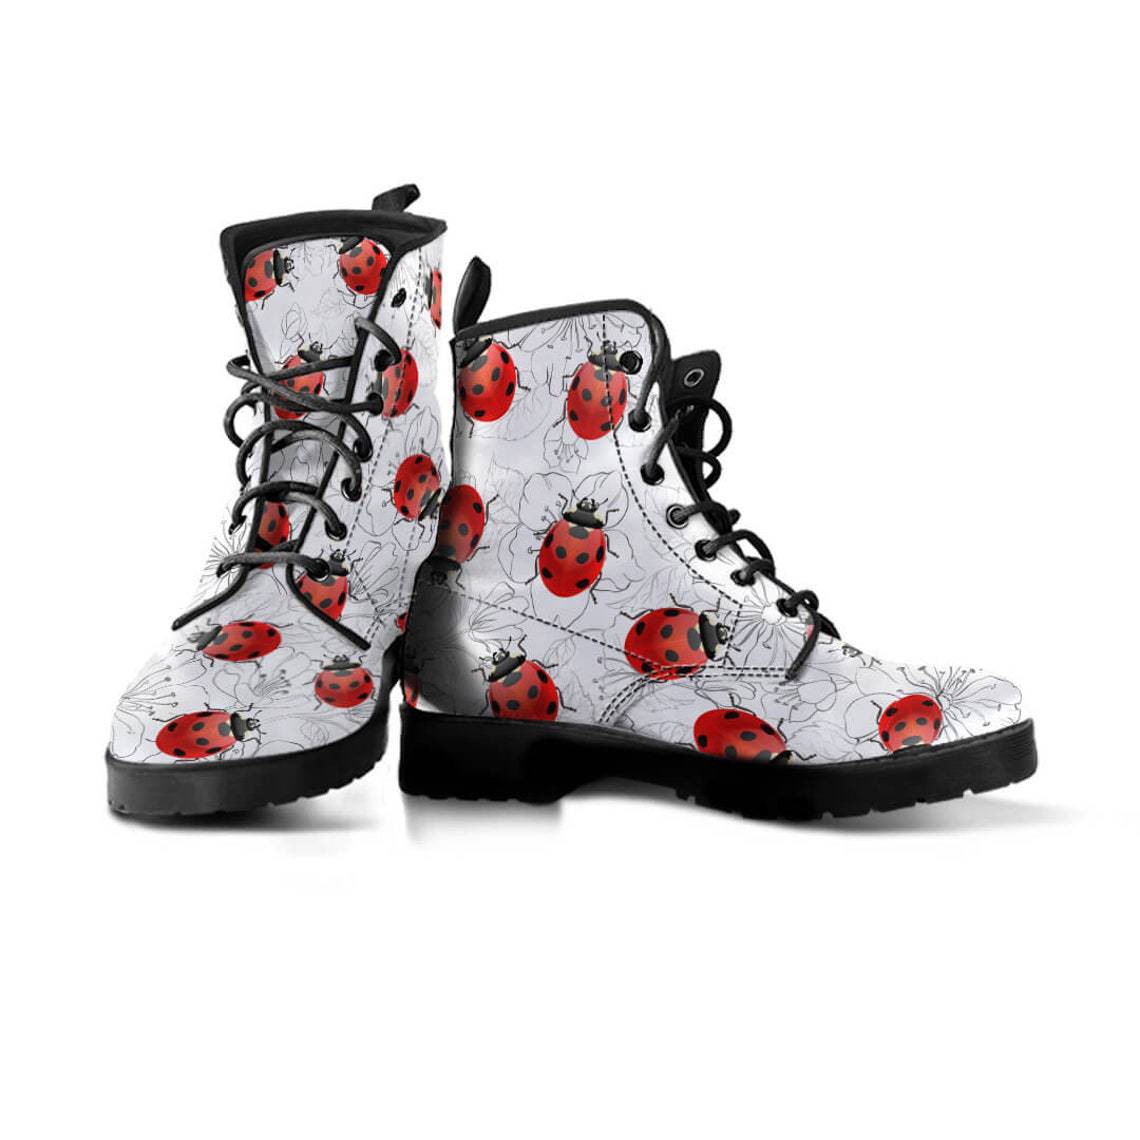 Digital Printing Women's High-top Motorcycle Boots